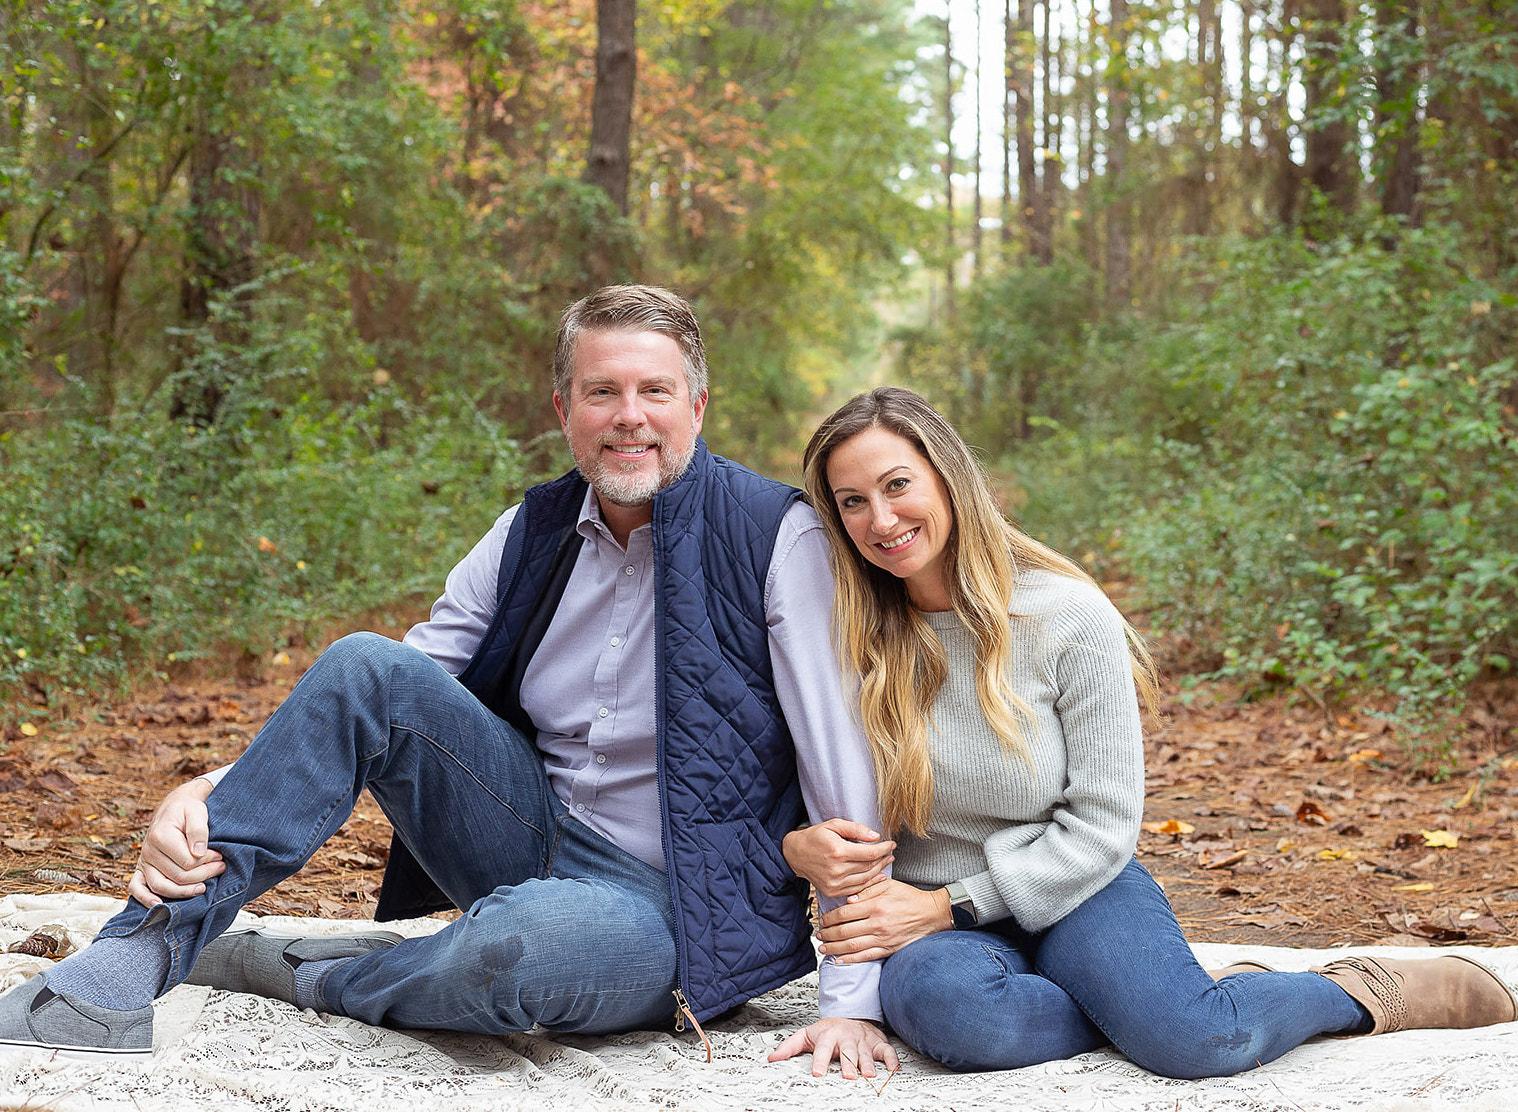 Jim and Meredith smiling and sitting down posing for a photo in a forest.